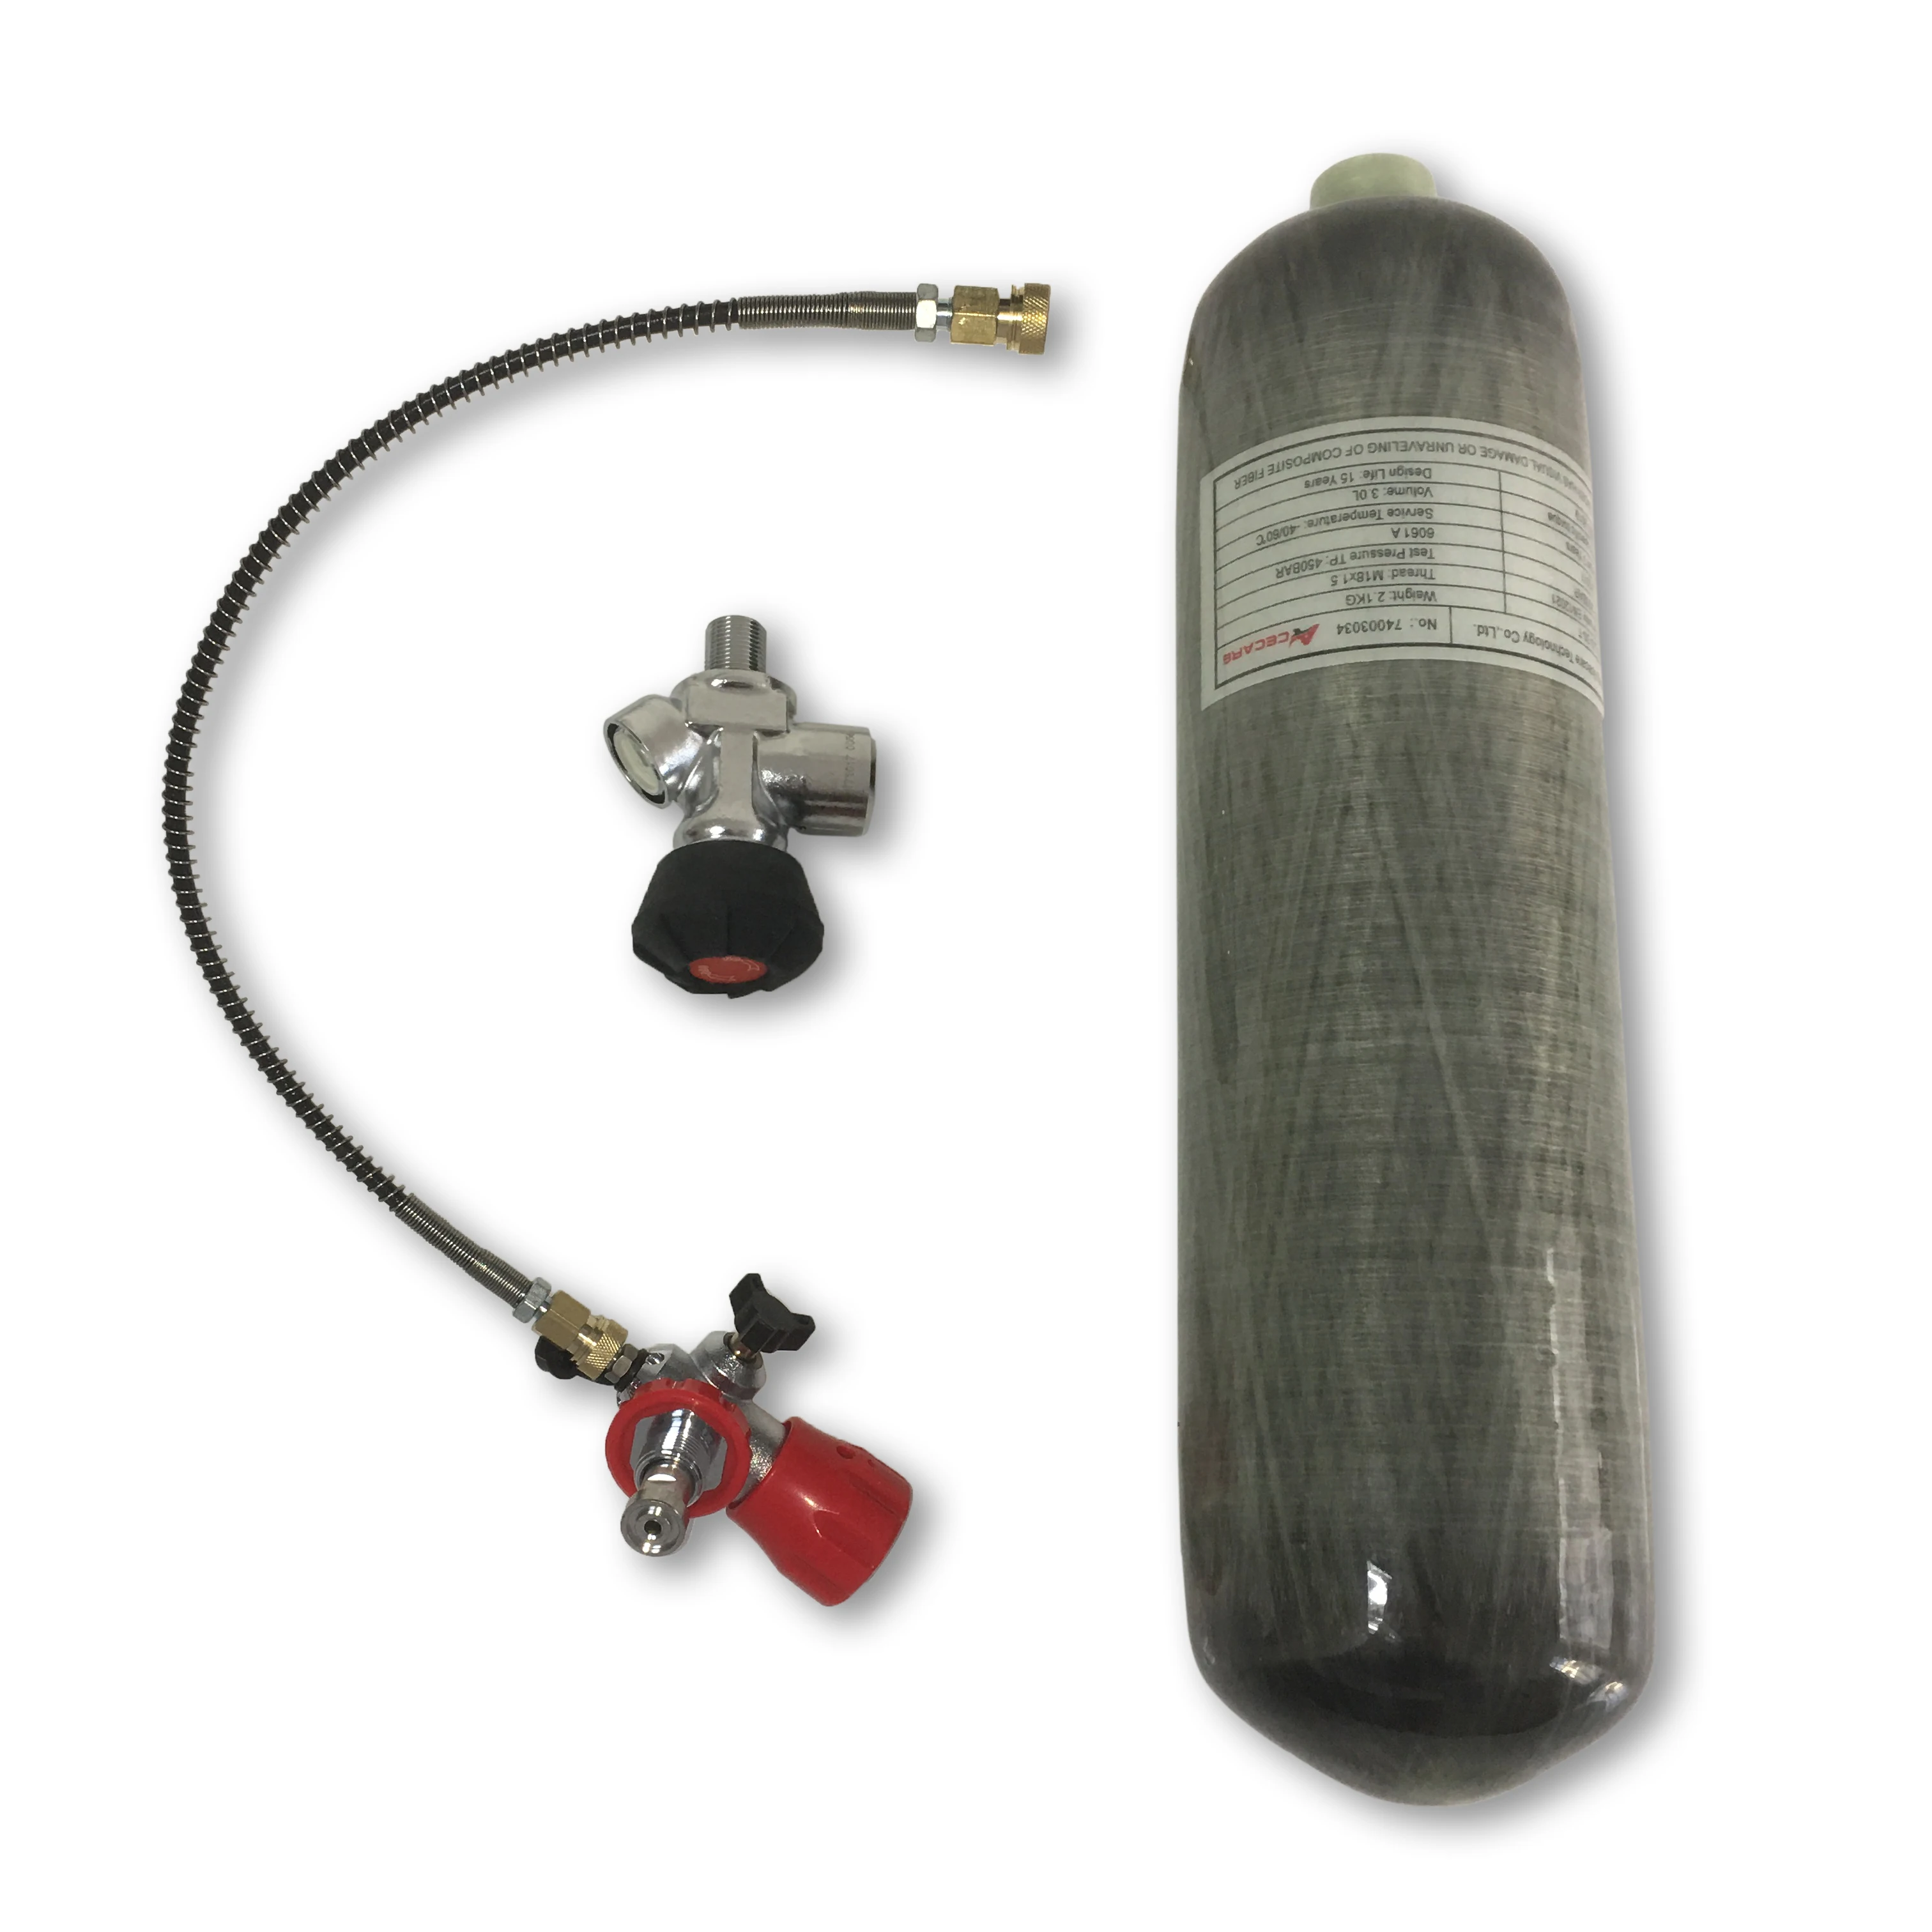 acecare 2l ce high pressure gas air tank 300bar 4500psi with valve and filing station for diving ACECARE 2L CE High Pressure Gas Air Tank 300Bar 4500Psi With Valve and Filing Station For Diving